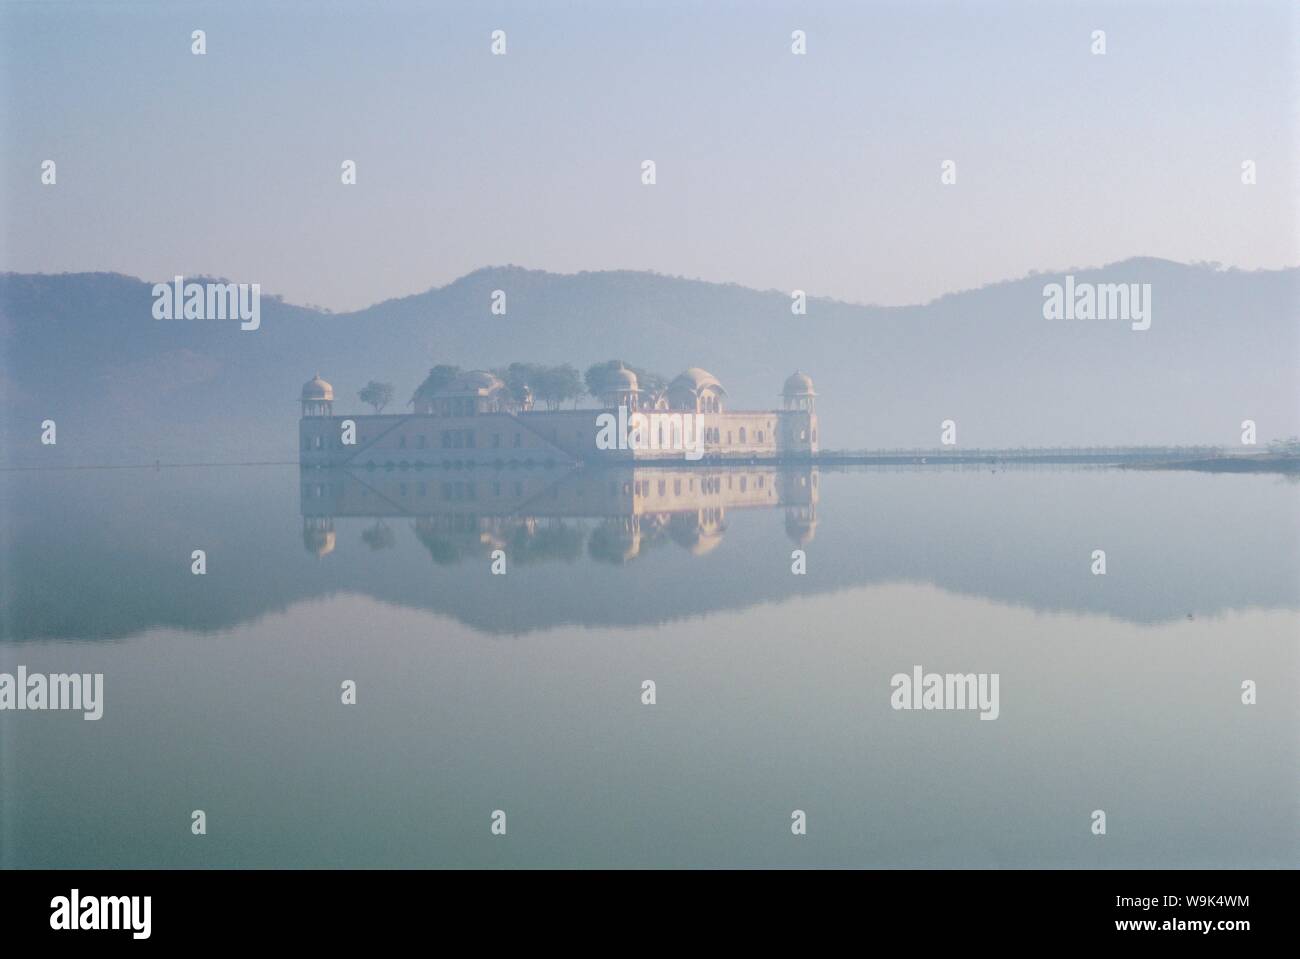 Jal Mahal, once a hunting lodge, reflected in the lake near Amber, Jaipur, Rajasthan, India Stock Photo